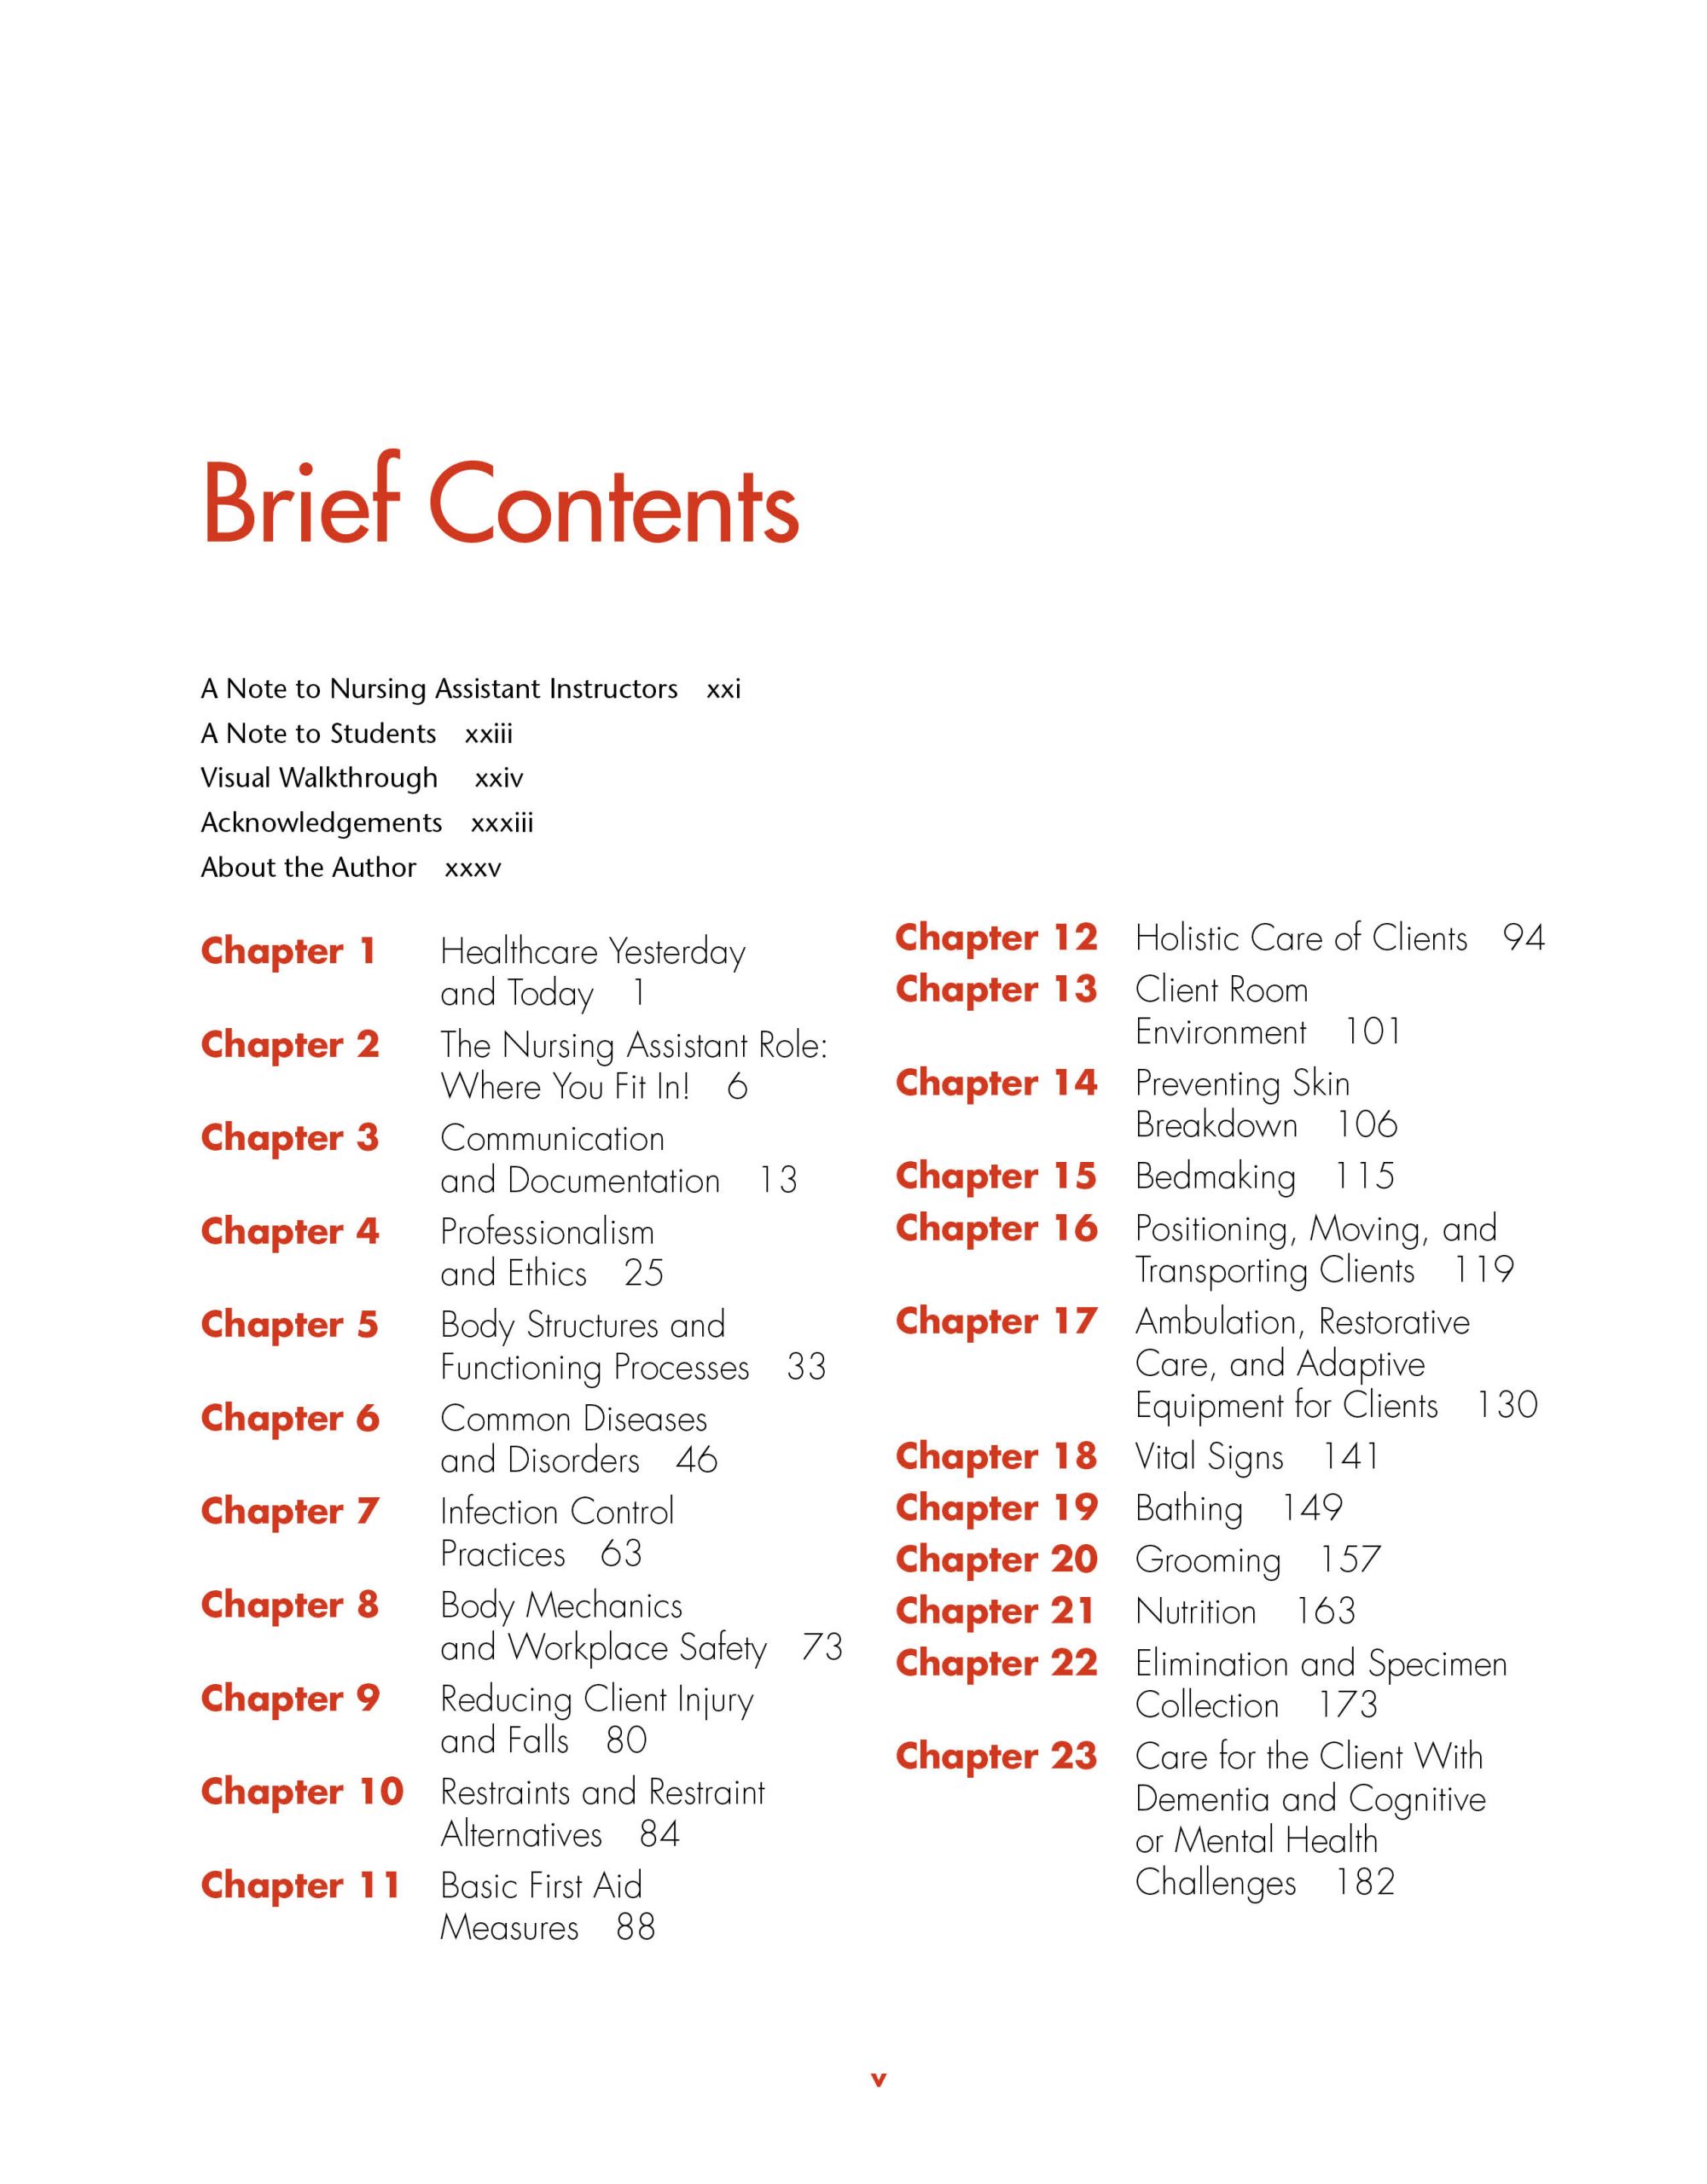 NA Brief Contents page 1